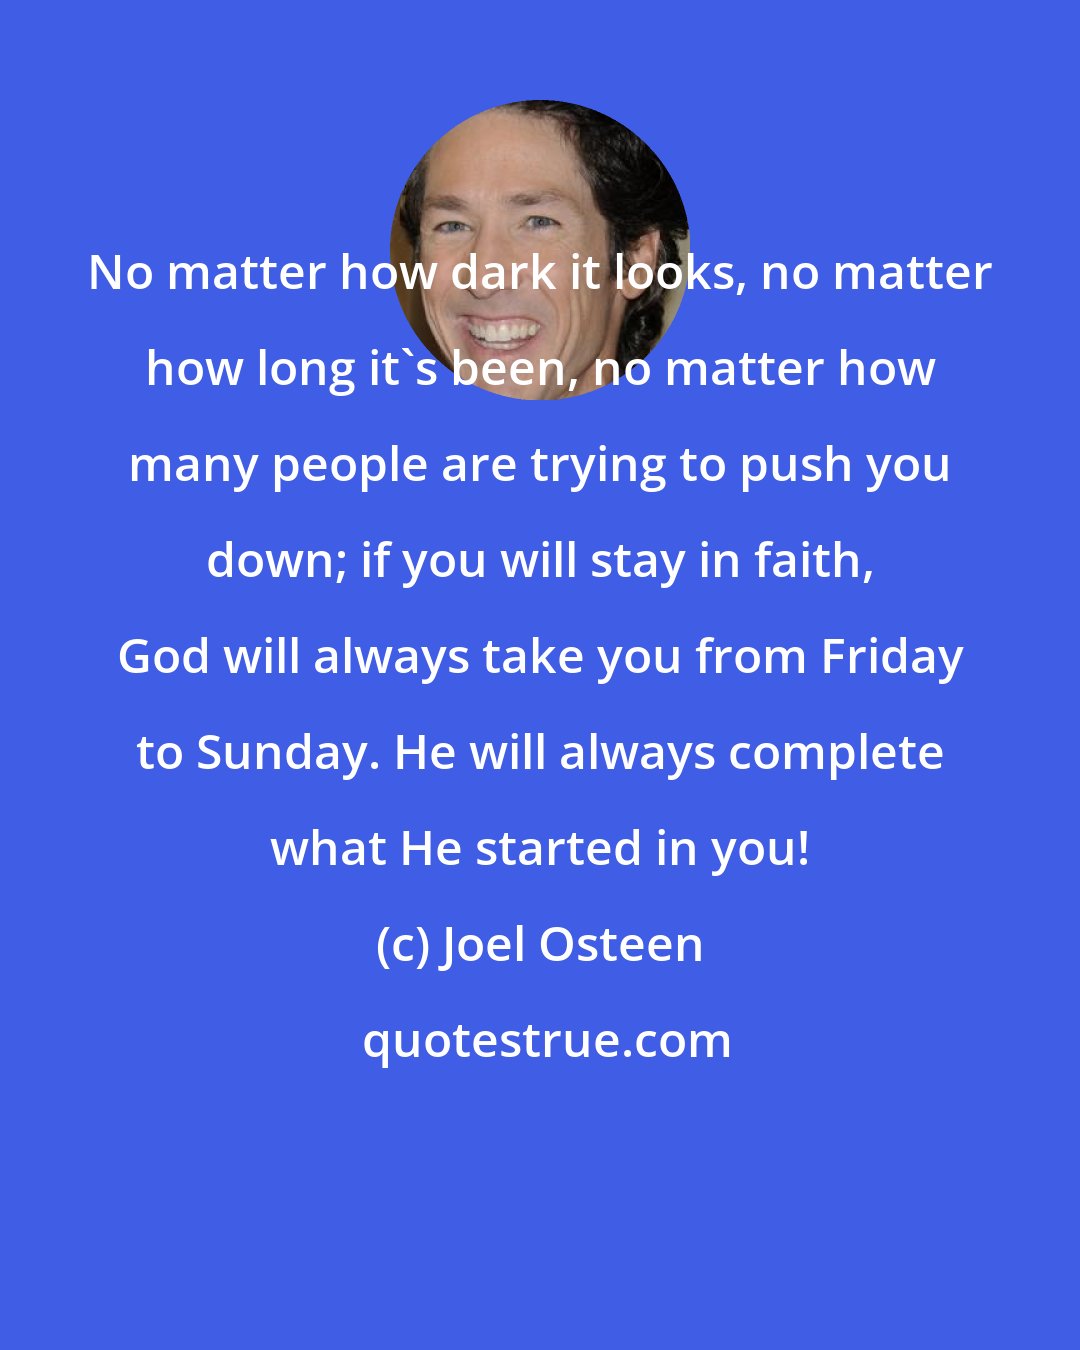 Joel Osteen: No matter how dark it looks, no matter how long it's been, no matter how many people are trying to push you down; if you will stay in faith, God will always take you from Friday to Sunday. He will always complete what He started in you!